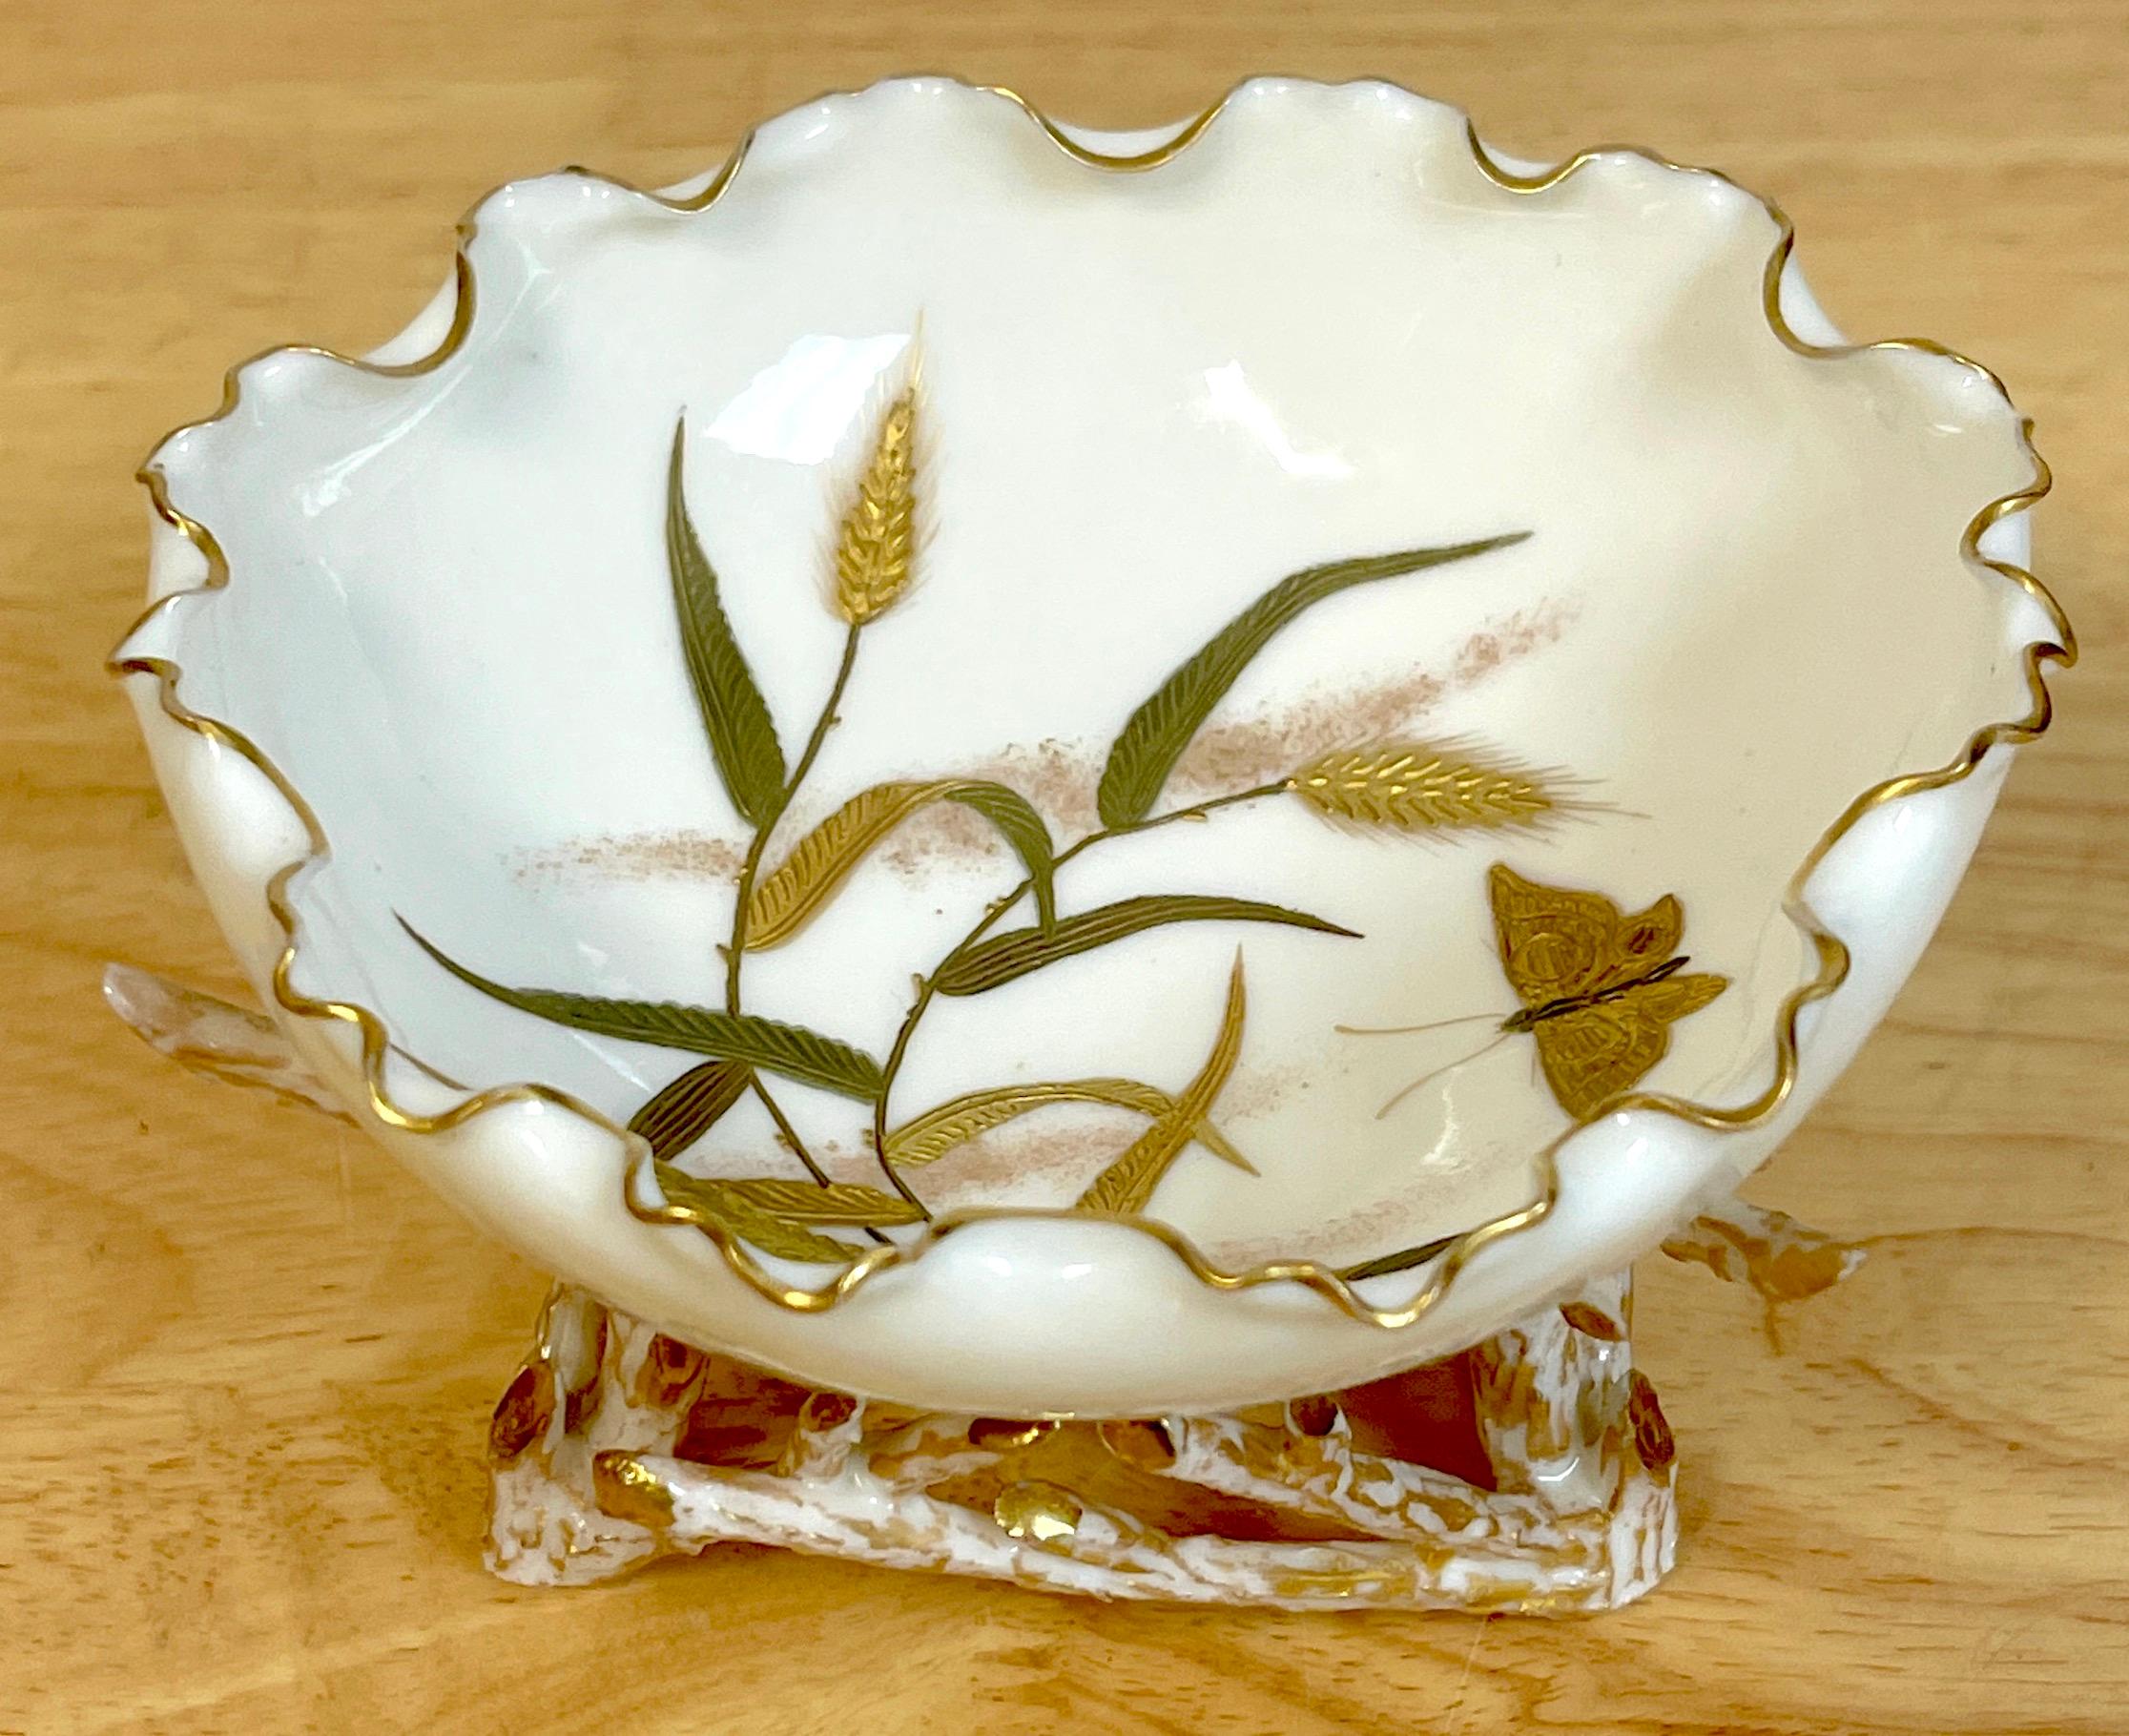 Ott & Brewer American Belleek, Aesthetic Movement Bowl 
USA, Trenton NJ, circa 1880s

A fine and rare example of a short lived period in American porcelain, in the Aesthetic taste. The crimped bowl decorated in raised gilt enamel depicting a